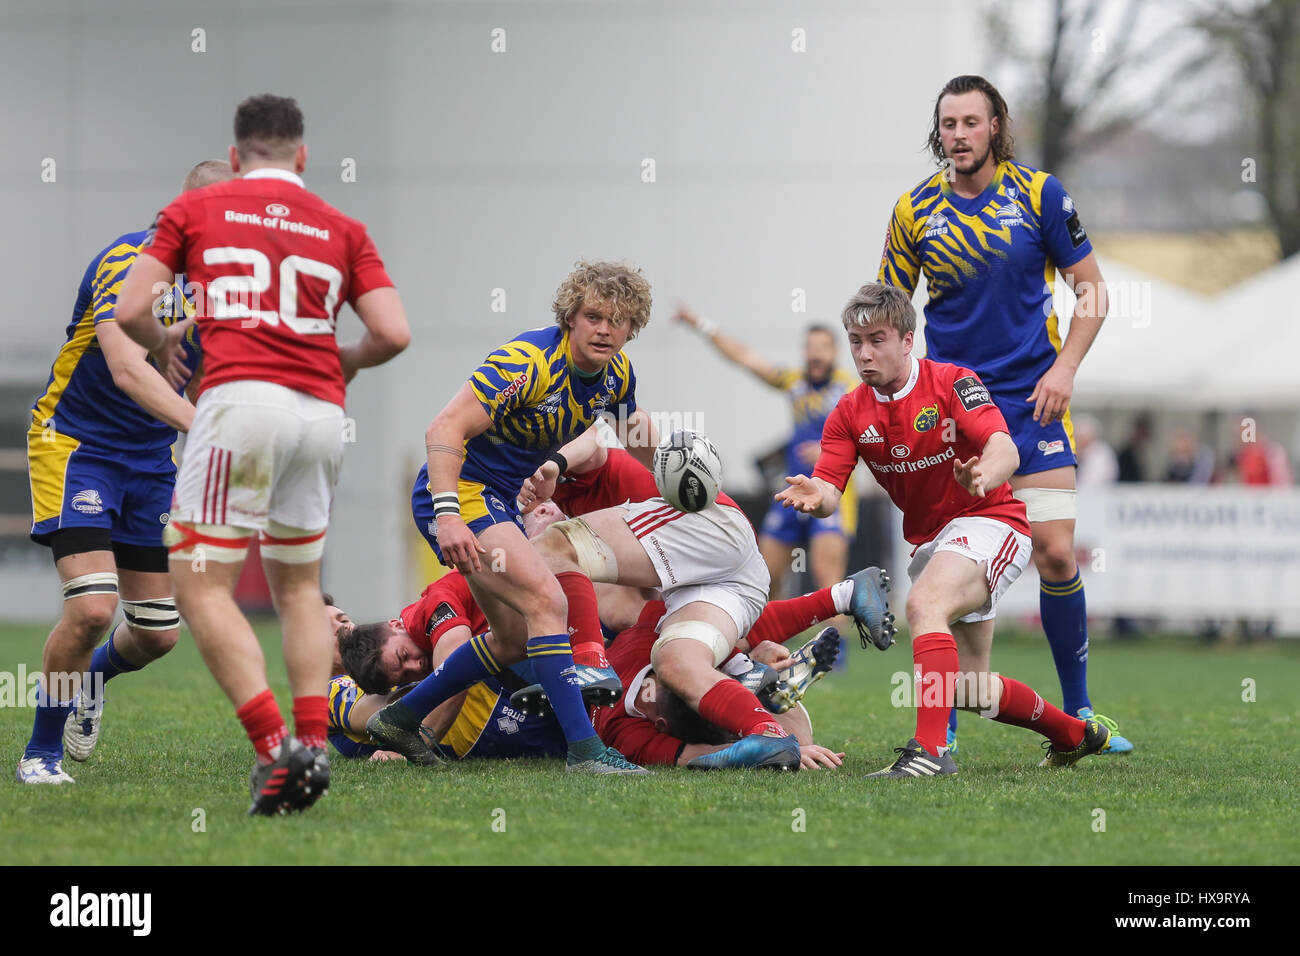 Parma, Italy. 25th Mar, 2017. Munster's scrum half Angus Lloyd passes the  ball to his teammate in the match against Zebre in GuinnessPRO12 Credit:  Massimiliano Carnabuci/Alamy news Stock Photo - Alamy